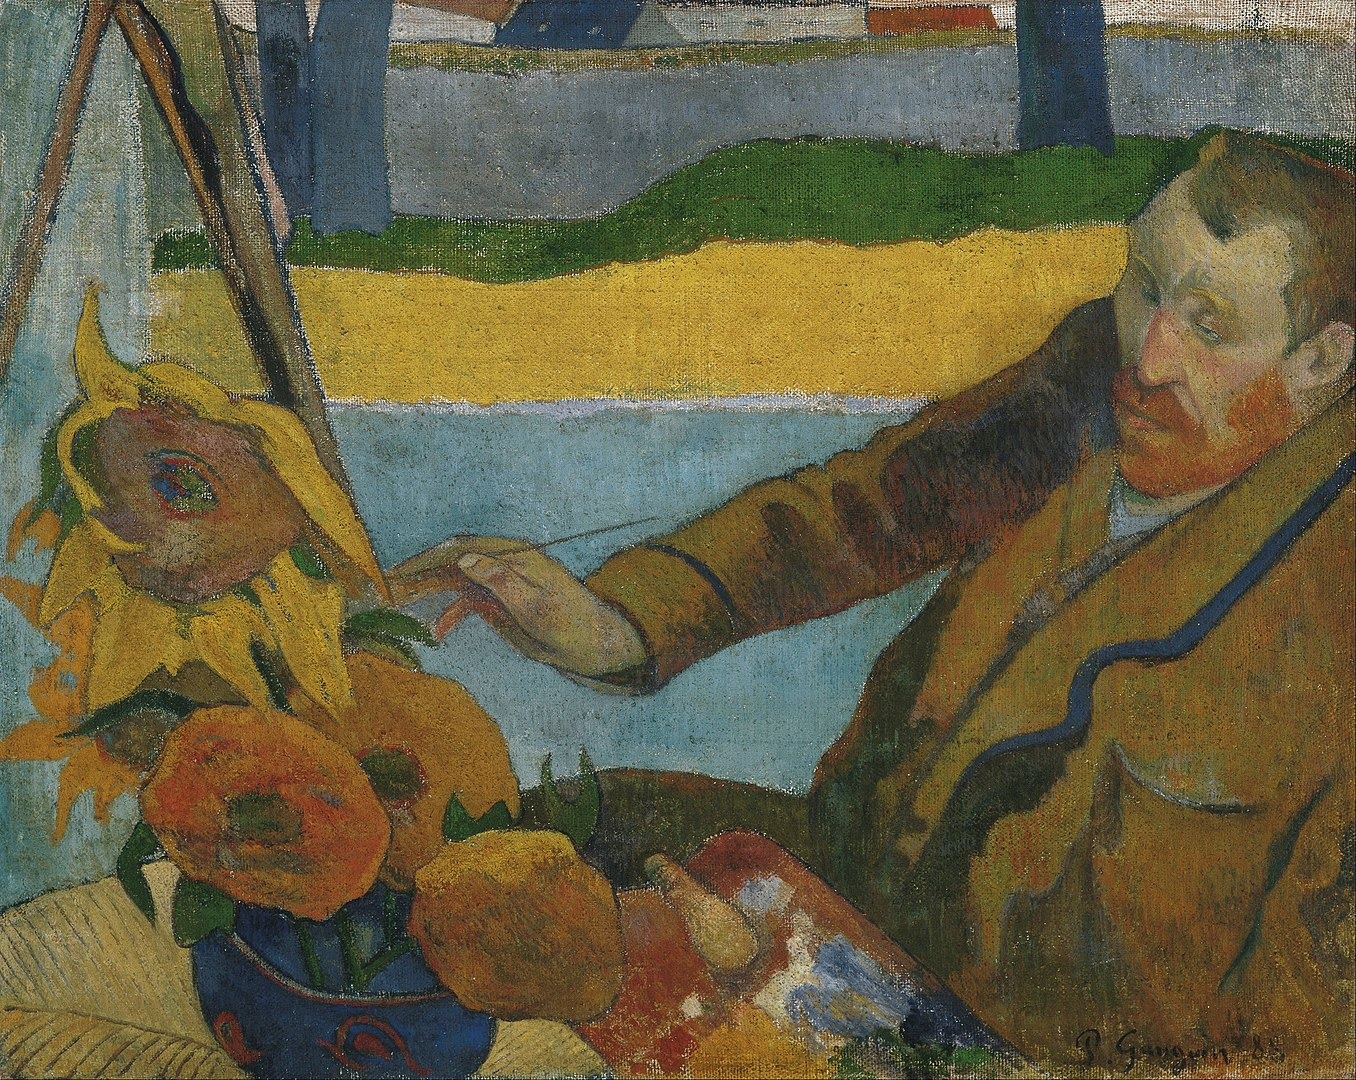 When did Gauguin live with Van Gogh in The Yellow House?